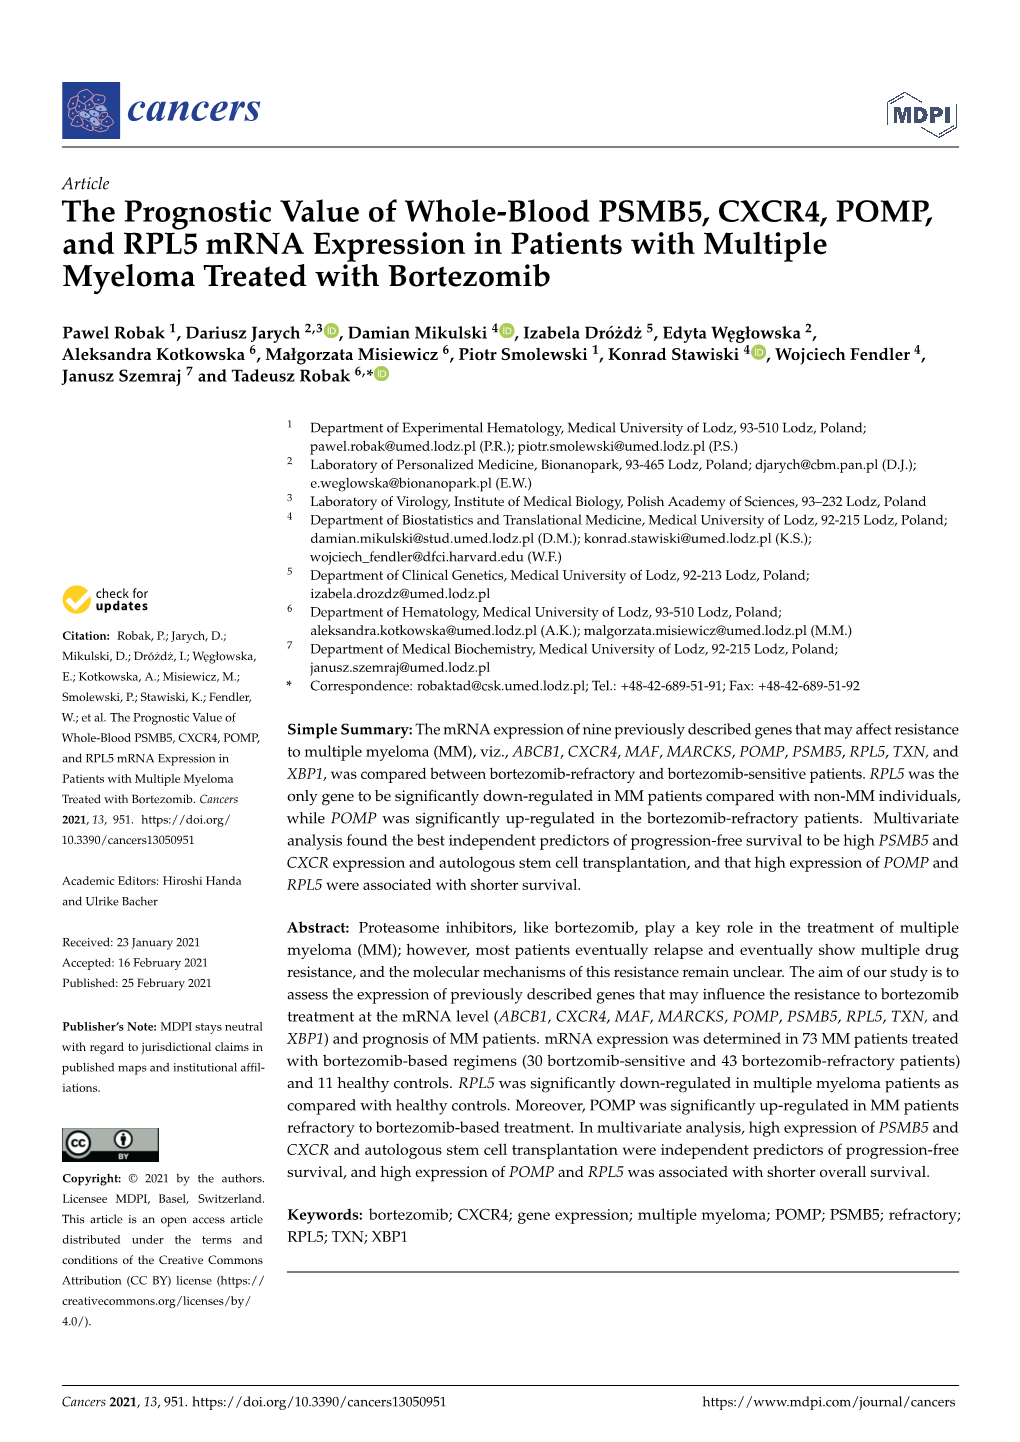 The Prognostic Value of Whole-Blood PSMB5, CXCR4, POMP, and RPL5 Mrna Expression in Patients with Multiple Myeloma Treated with Bortezomib